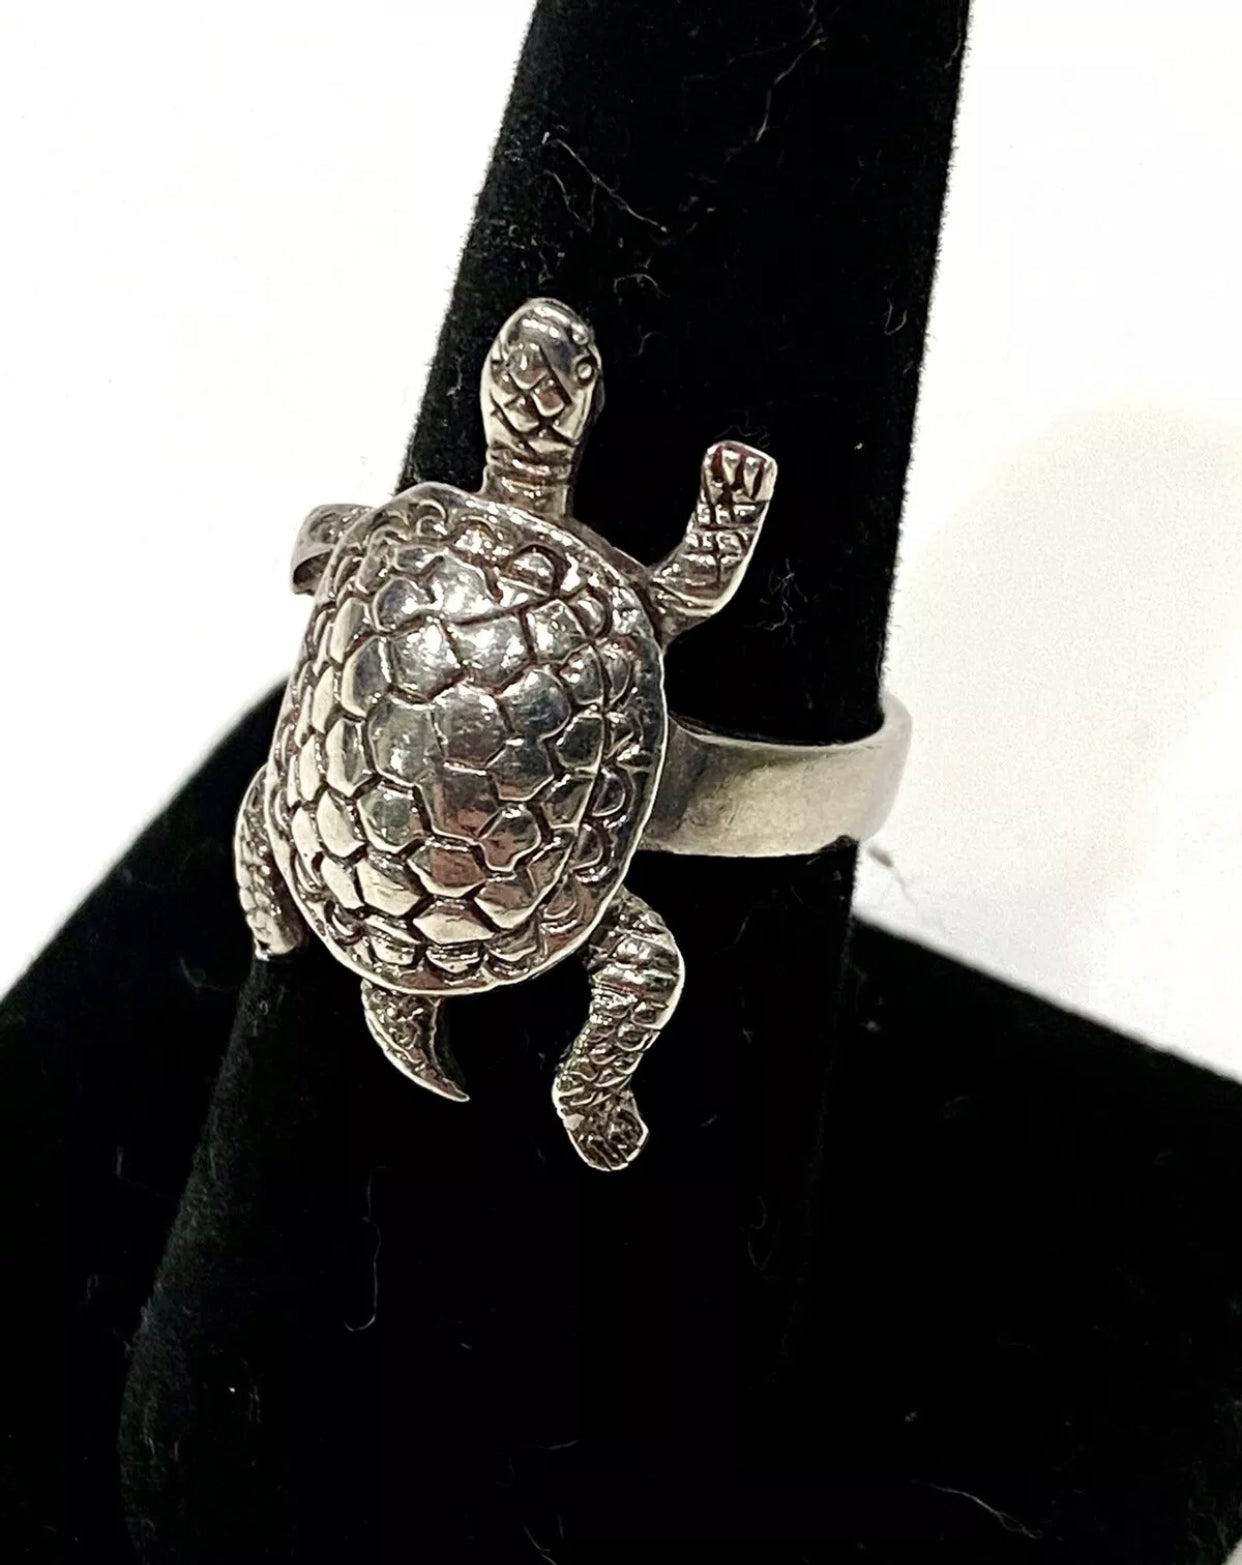 Buy silver white and red stone turtle ring at Amazon.in